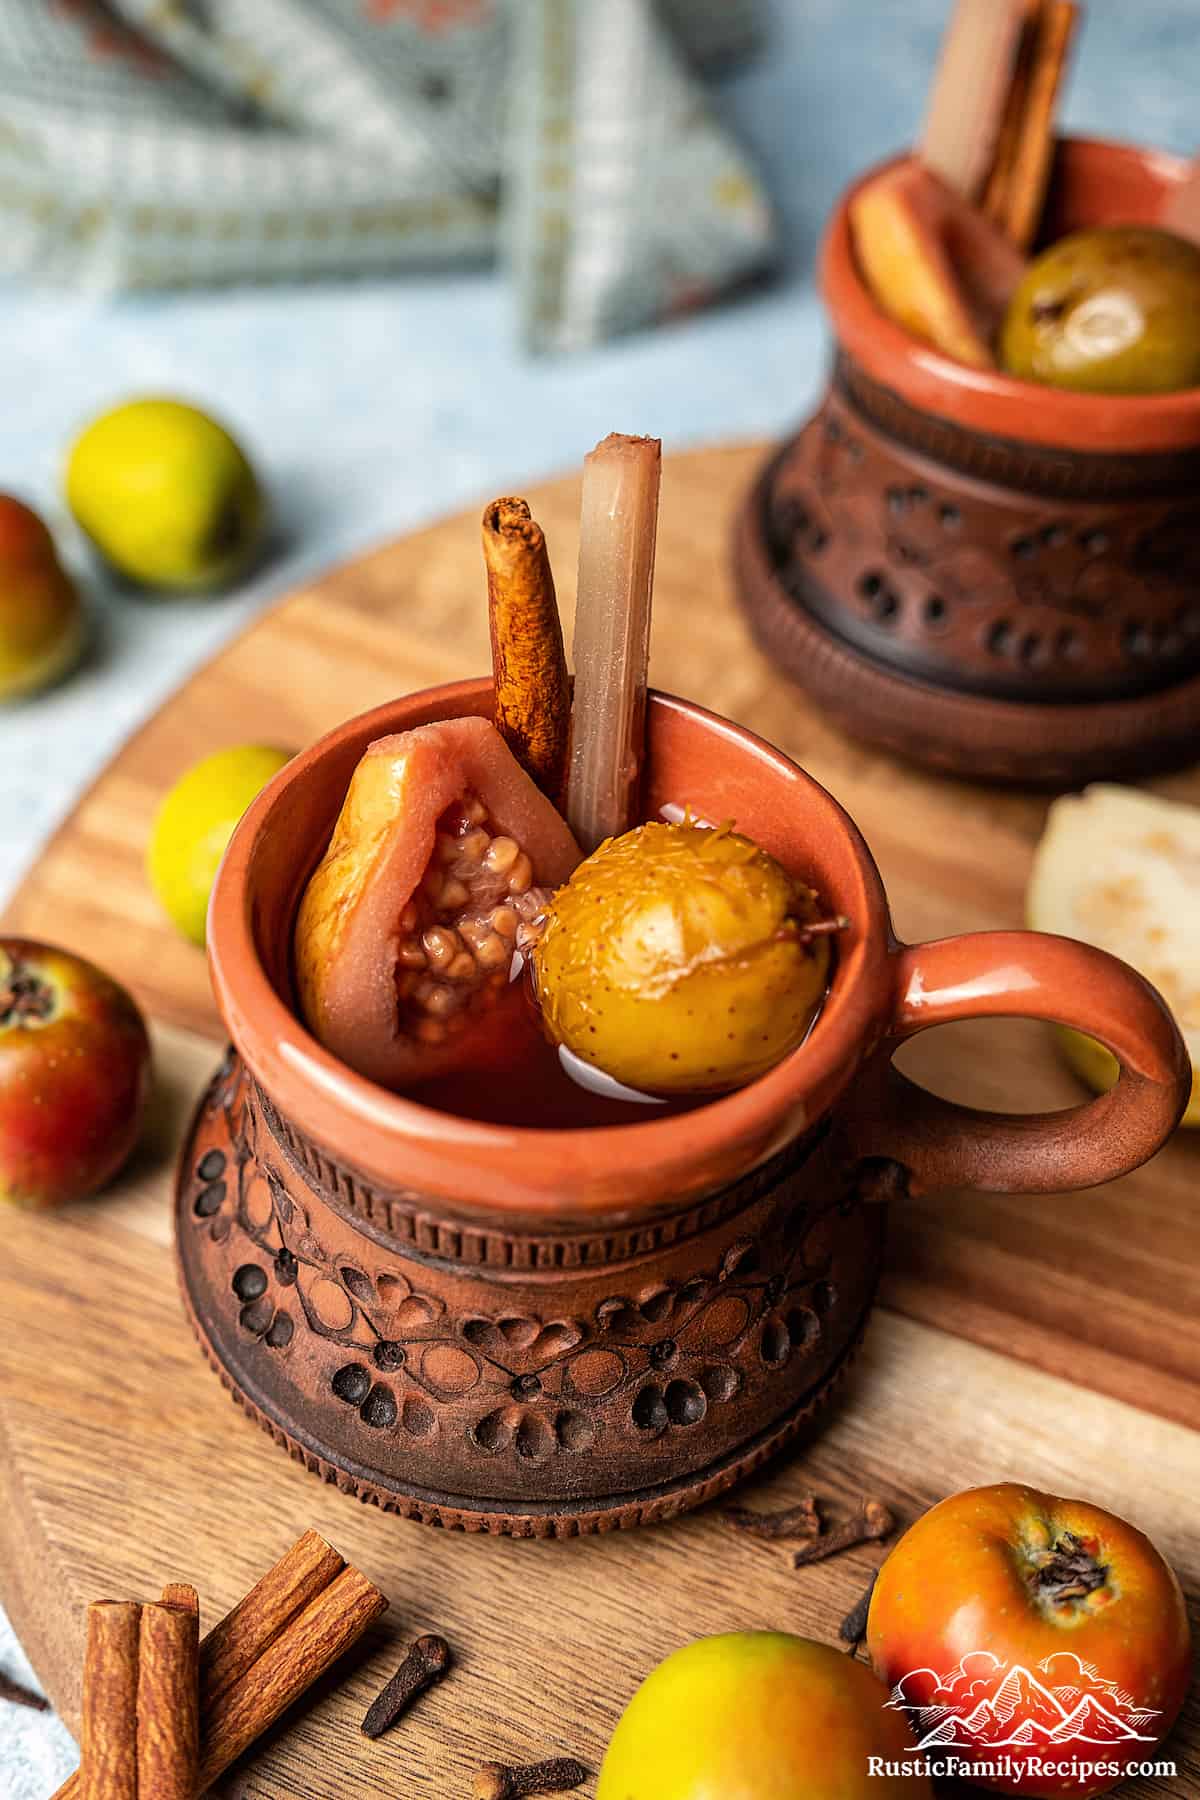 Ponche de frutas navideño in a cup with fruit and a cinnamon stick.